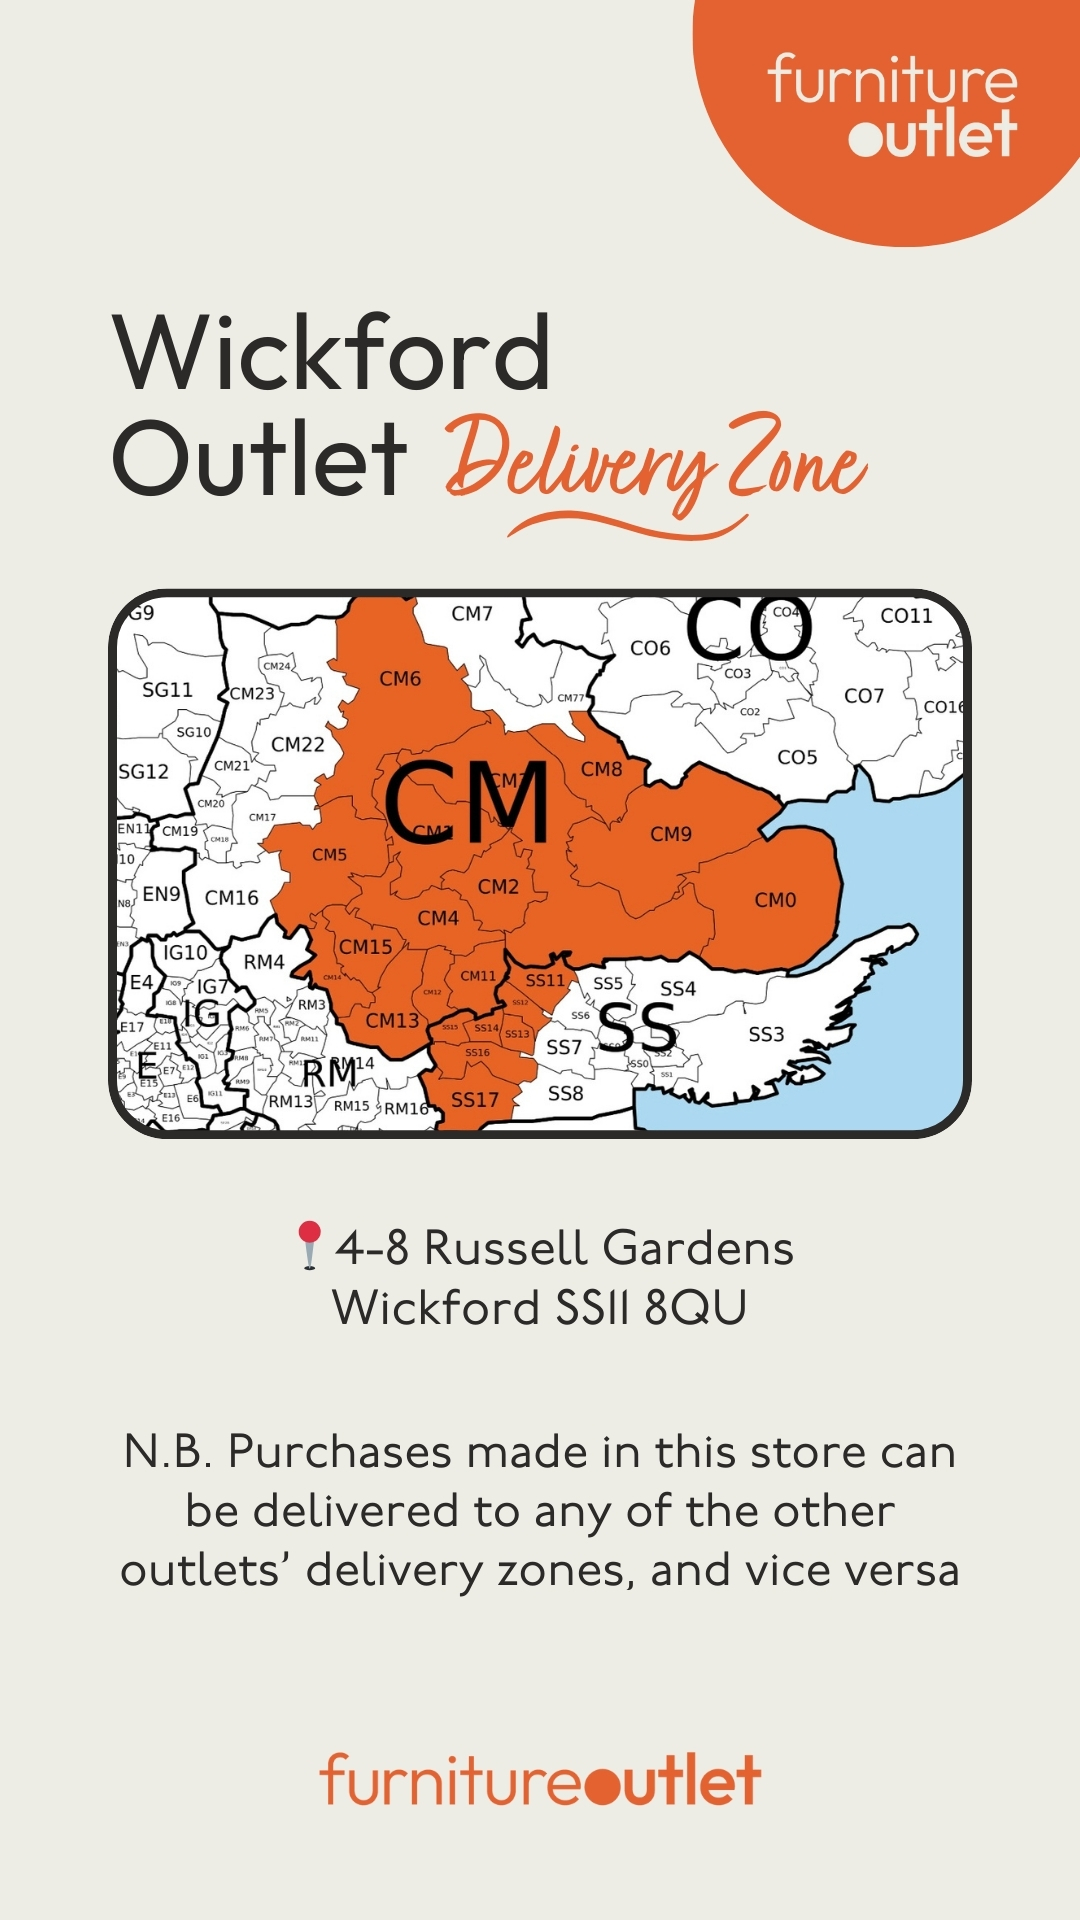 Furniture Outlet Wickford Delivery Zone Map